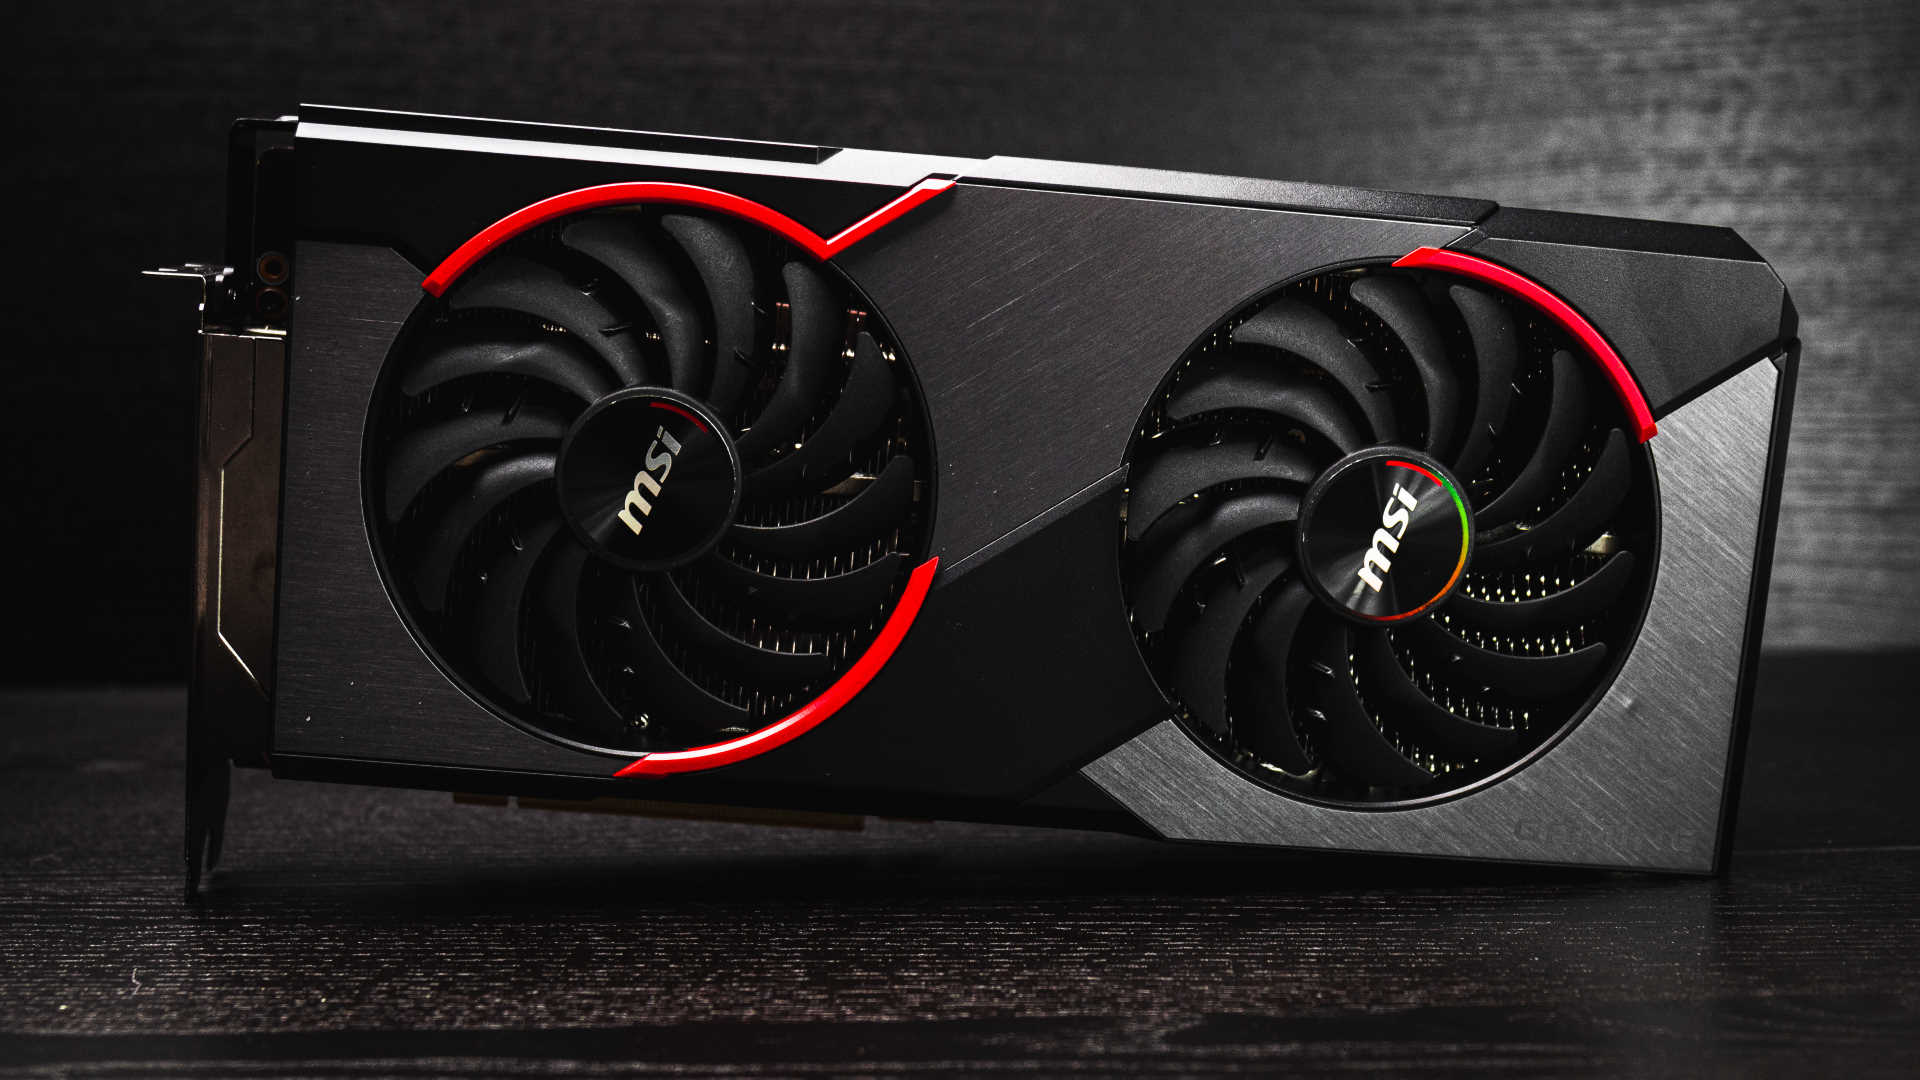 MSI RX 5700 XT Gaming X review: RTX 2070 Super performance and so 